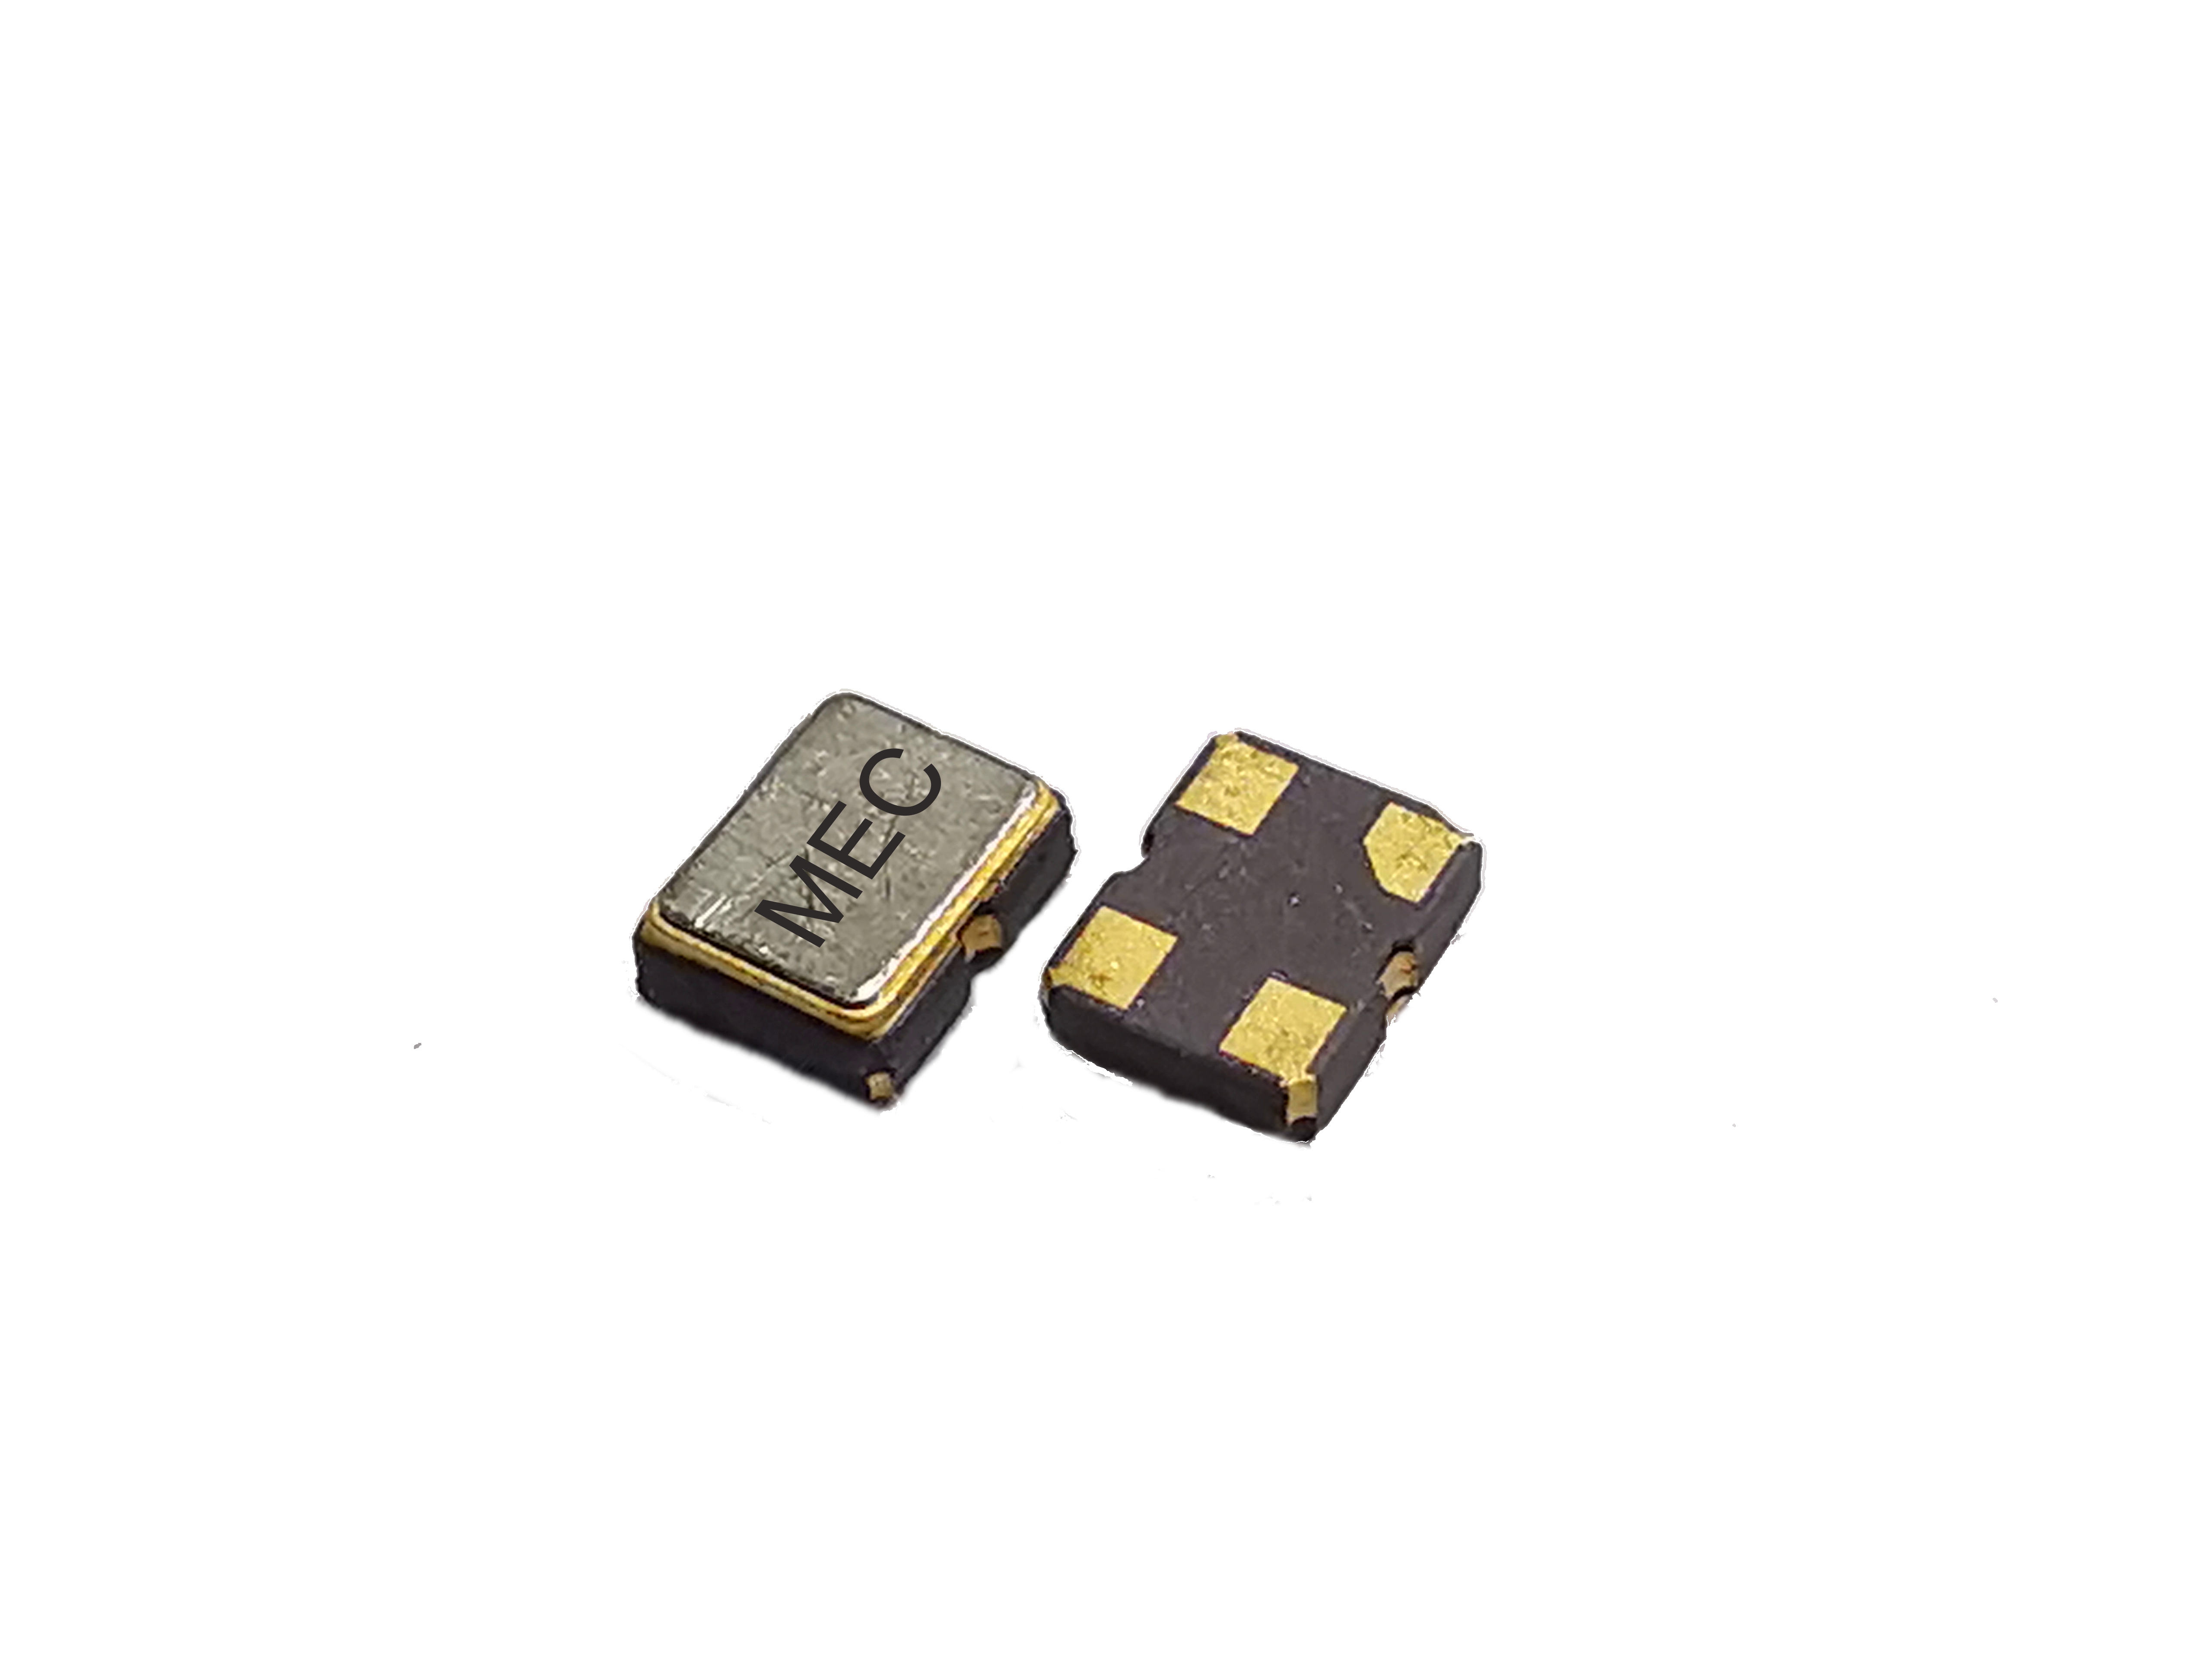 HY22 2520 1.8V Wide Operating Temperature -40℃ to +125℃ CMOS SMD Crystal Oscillator